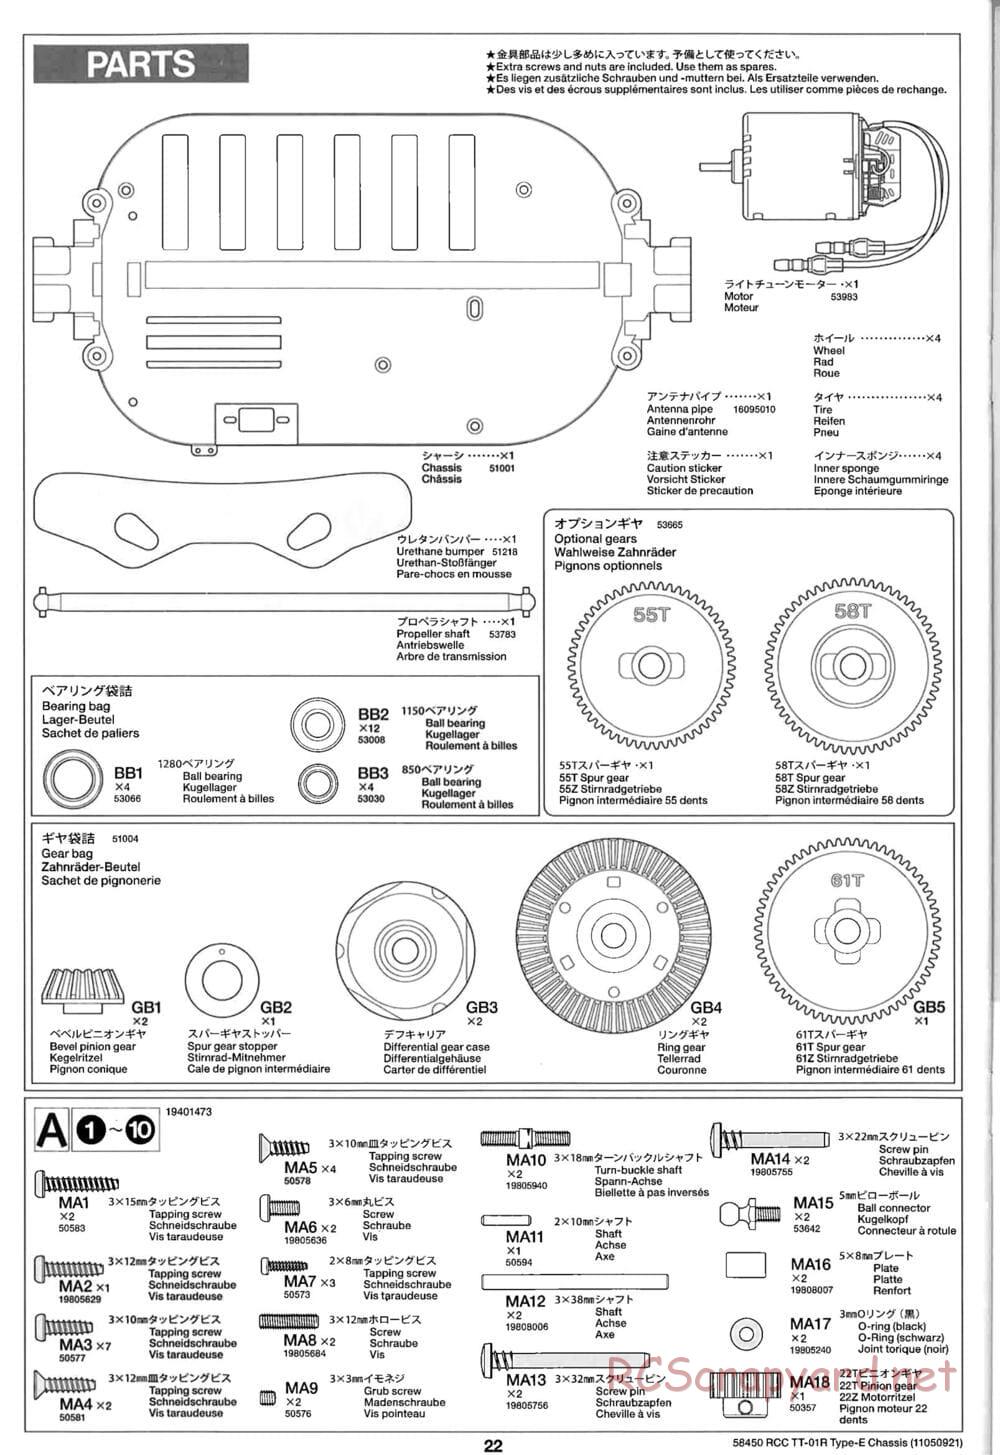 Tamiya - TT-01R Type-E Chassis - Manual - Page 22